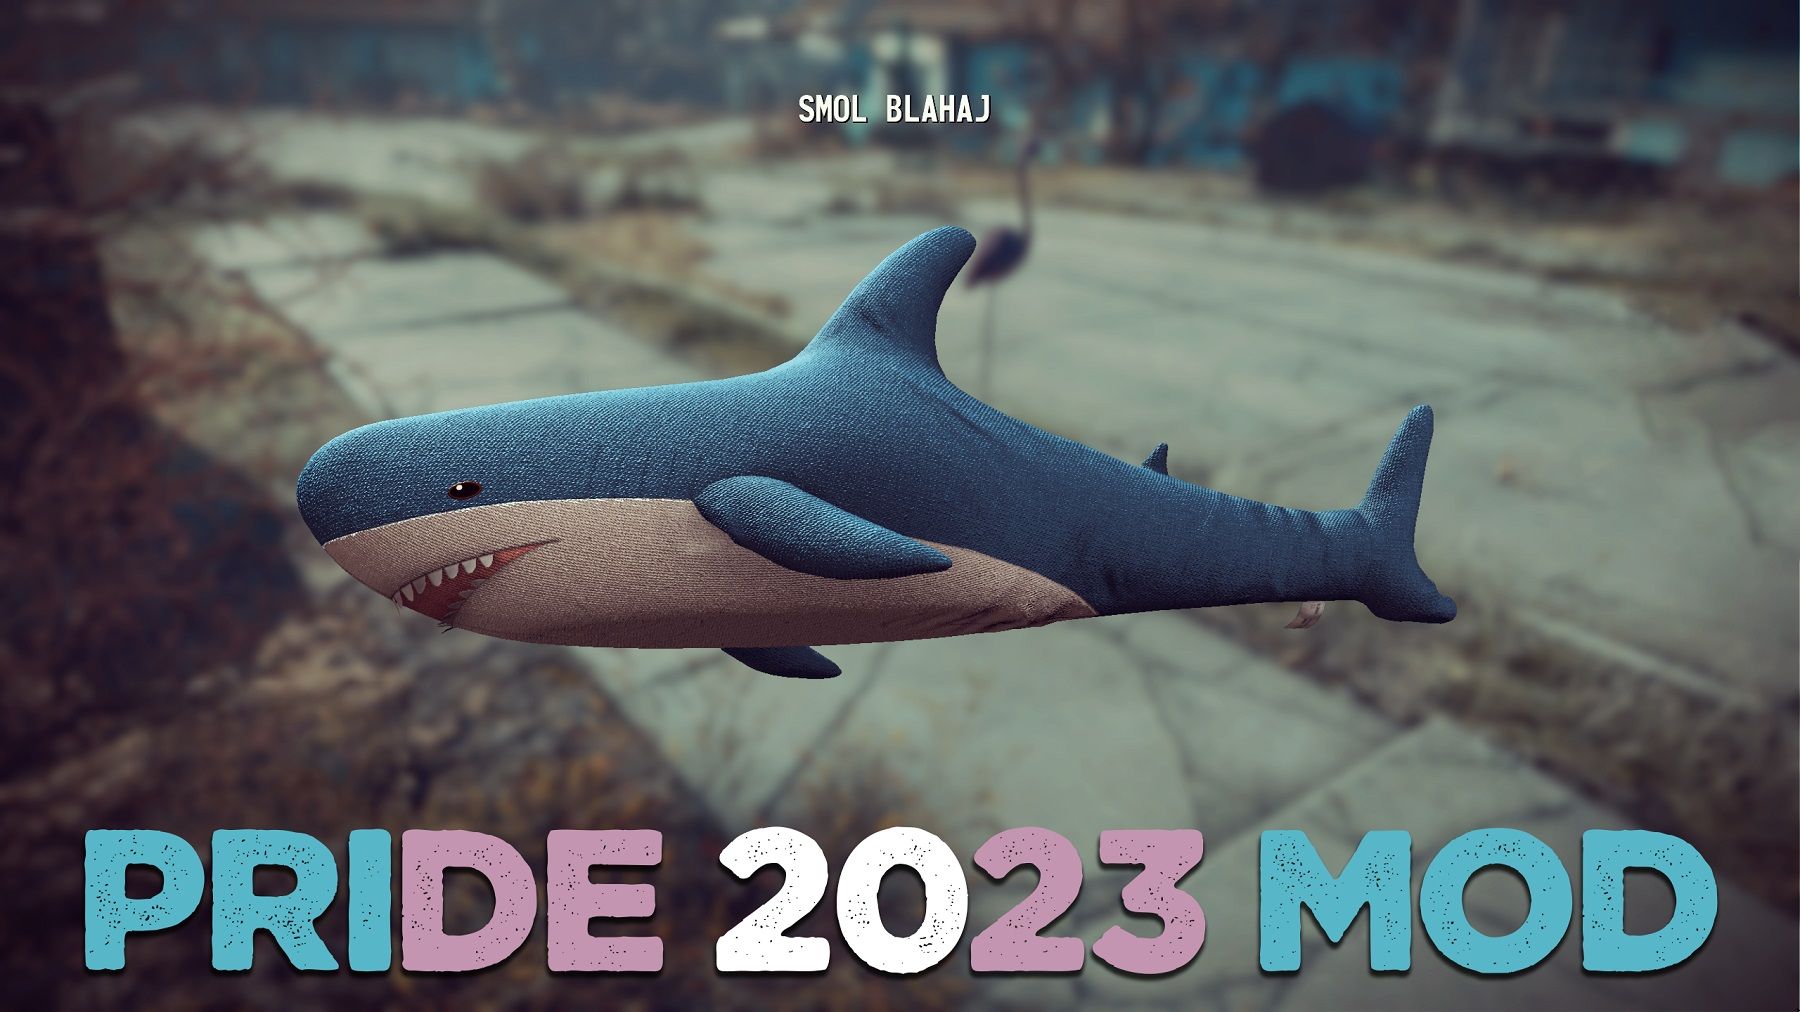 Image form Fallout 4 showing a toy shark with the words Pride 2023 mod written at the bottom.